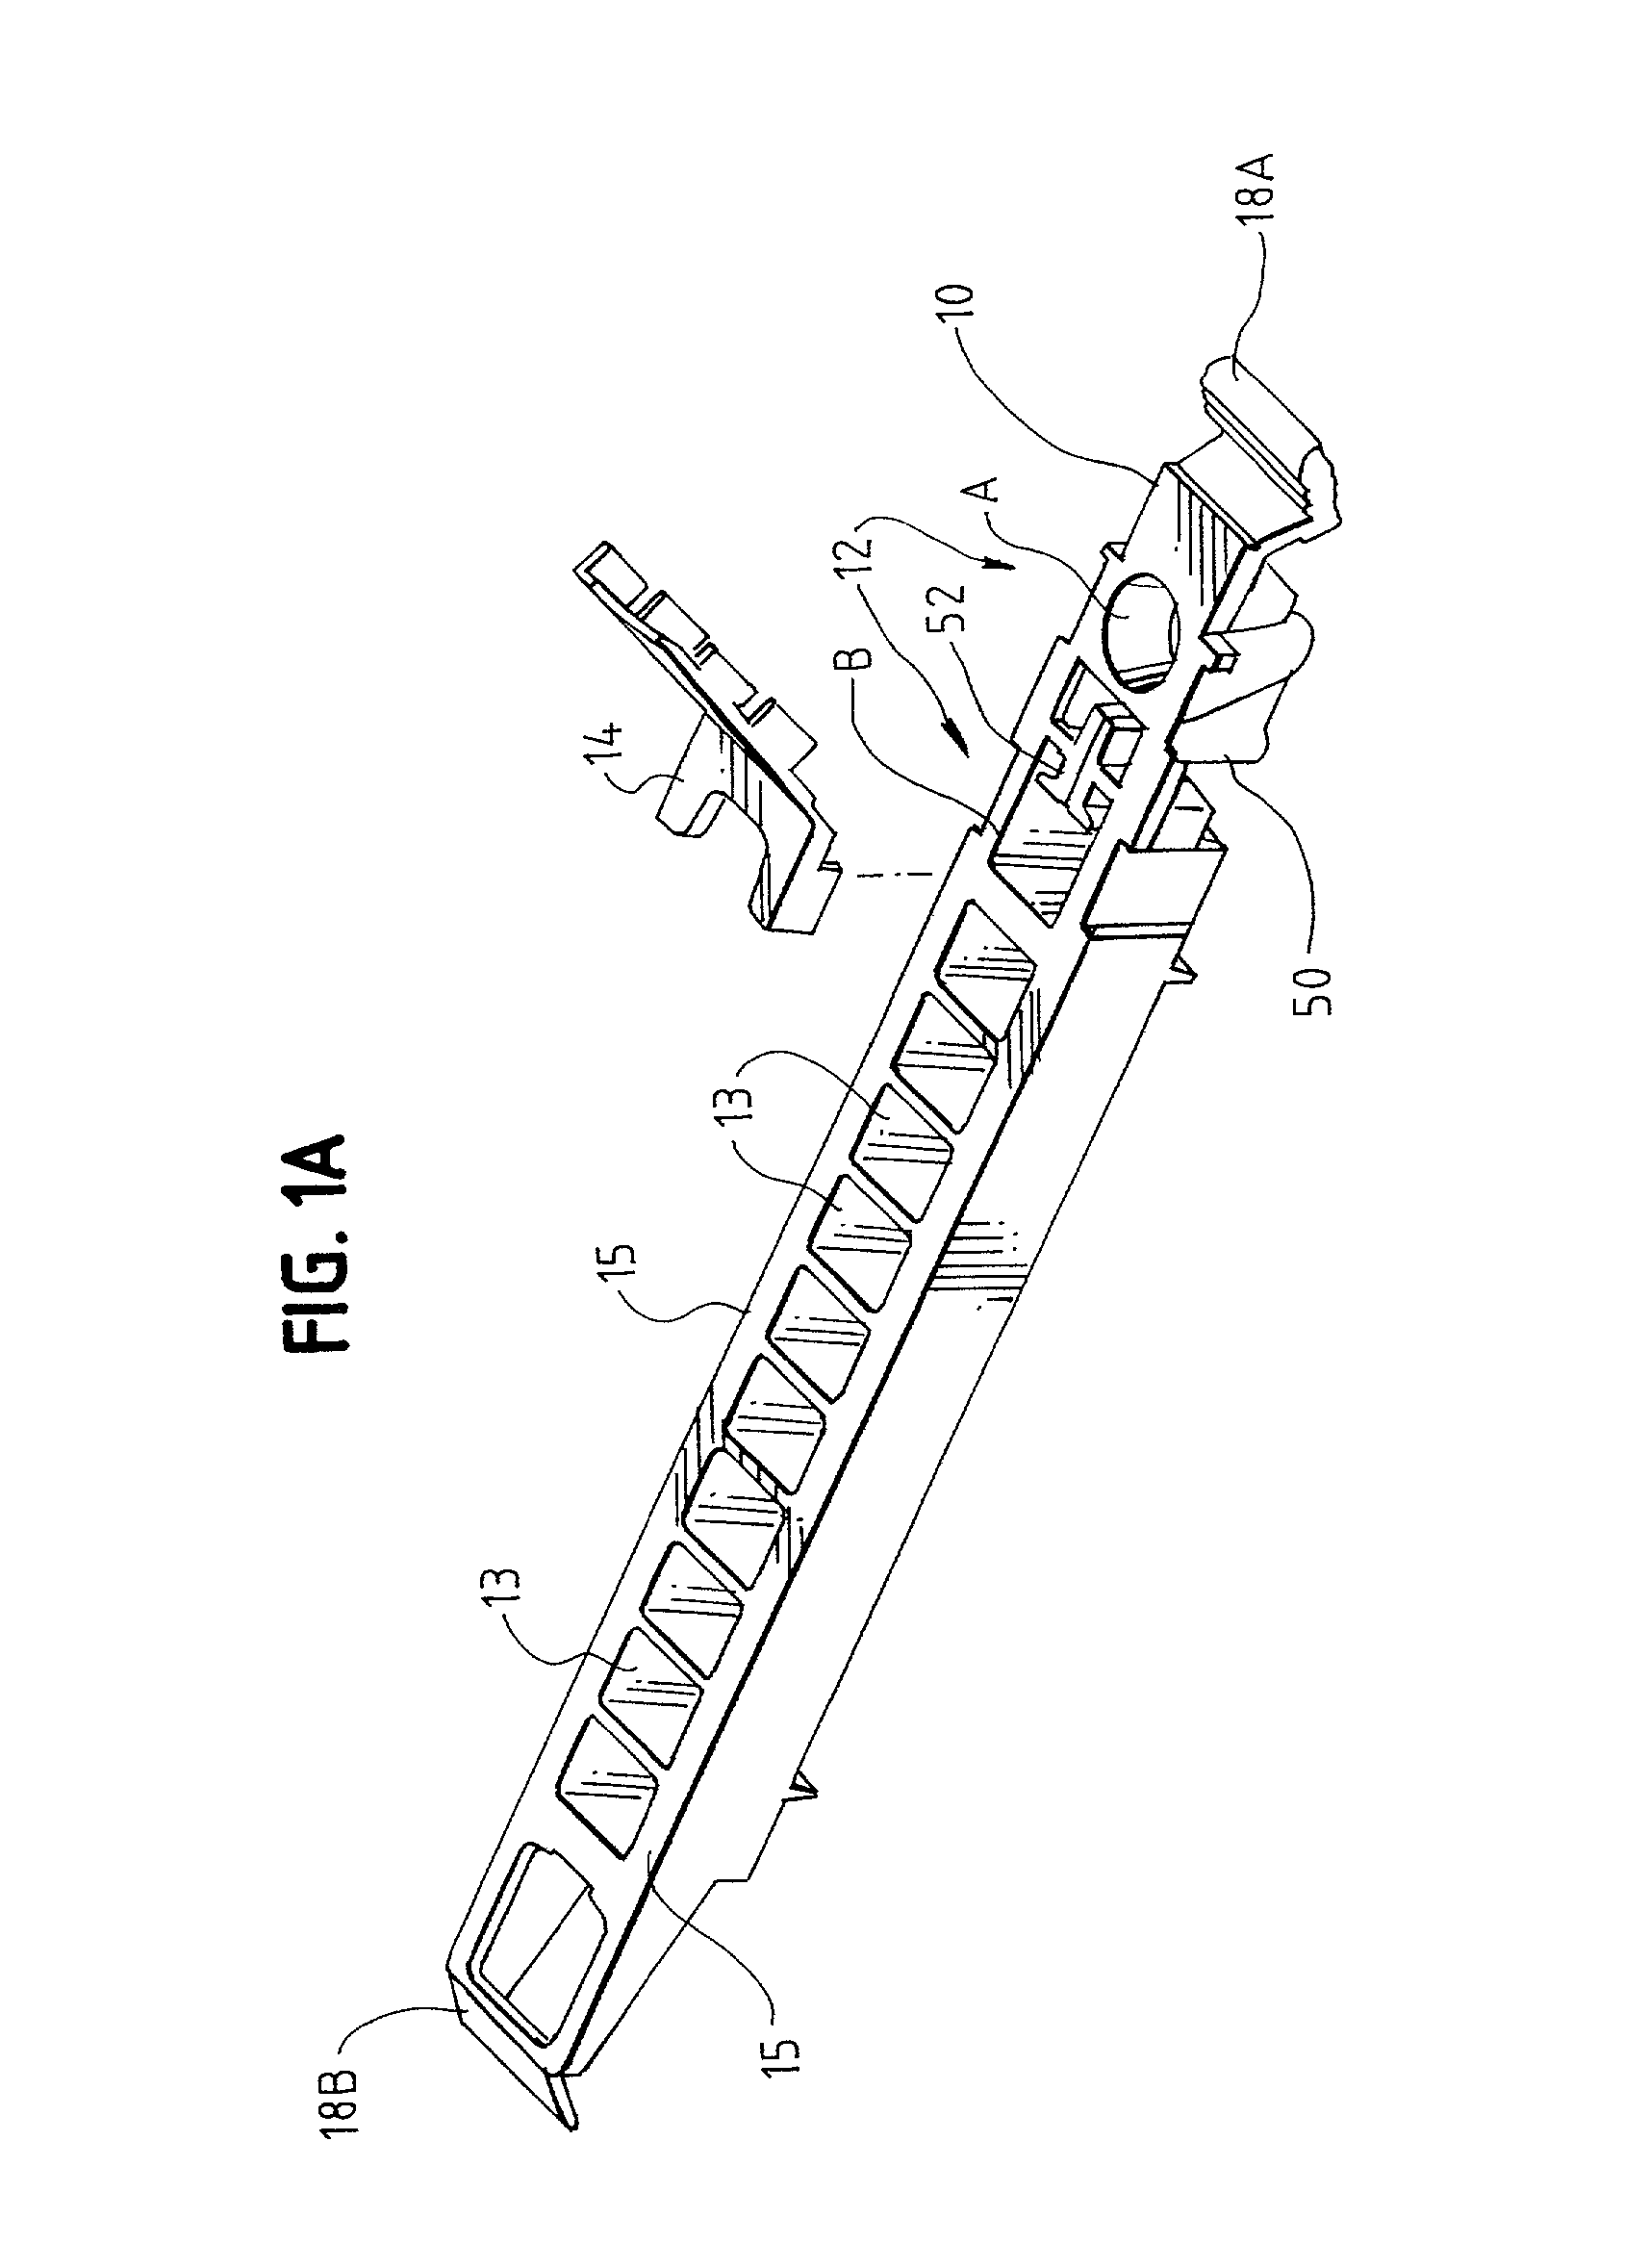 Nucleic acid amplification reaction station for disposable test devices